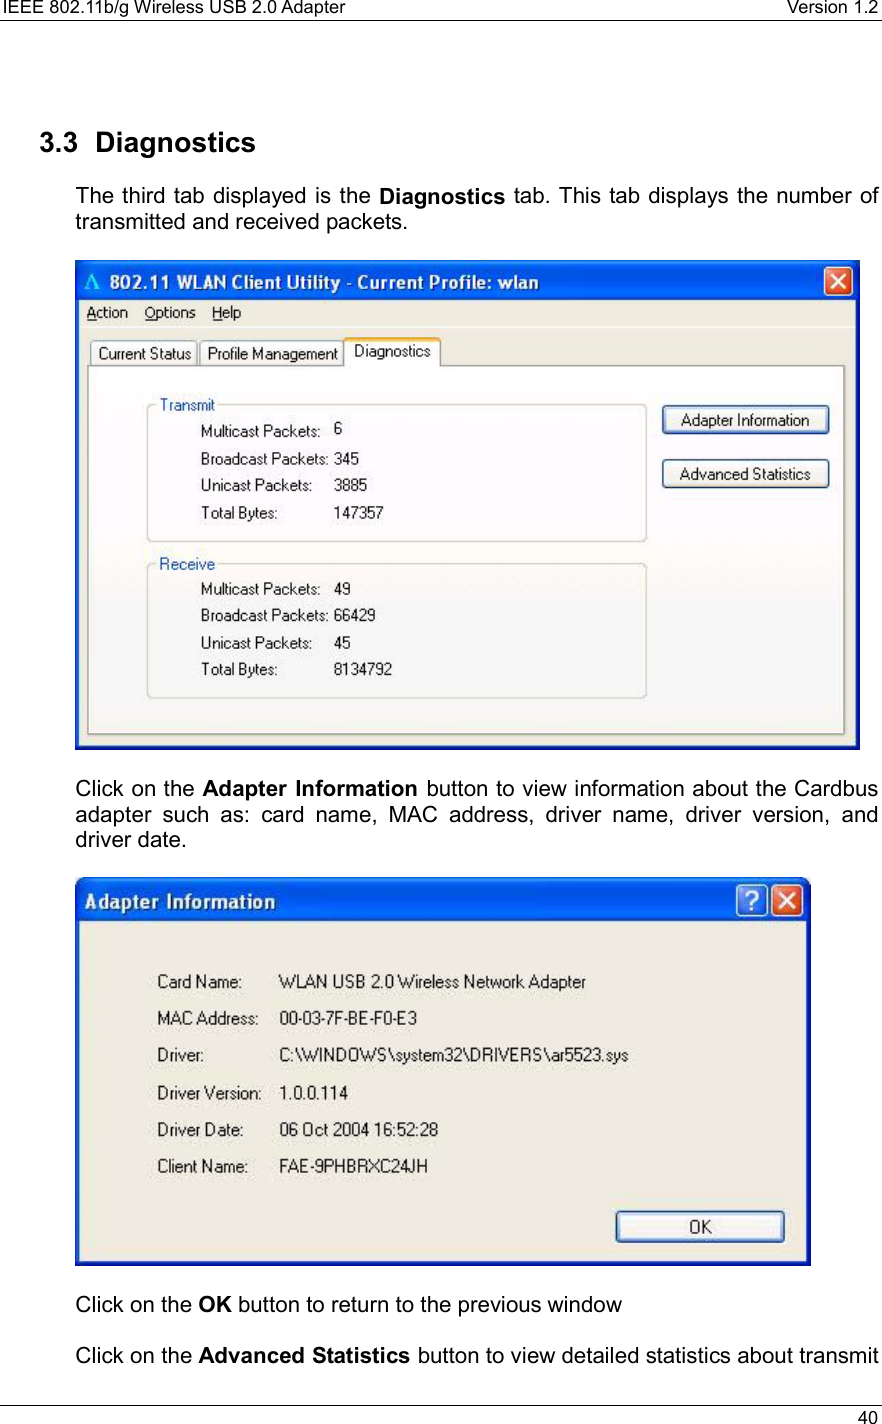 IEEE 802.11b/g Wireless USB 2.0 Adapter    Version 1.2   40   3.3 Diagnostics The third tab displayed is the Diagnostics tab. This tab displays the number of transmitted and received packets.      Click on the Adapter Information button to view information about the Cardbus adapter such as: card name, MAC address, driver name, driver version, and driver date.    Click on the OK button to return to the previous window   Click on the Advanced Statistics button to view detailed statistics about transmit 